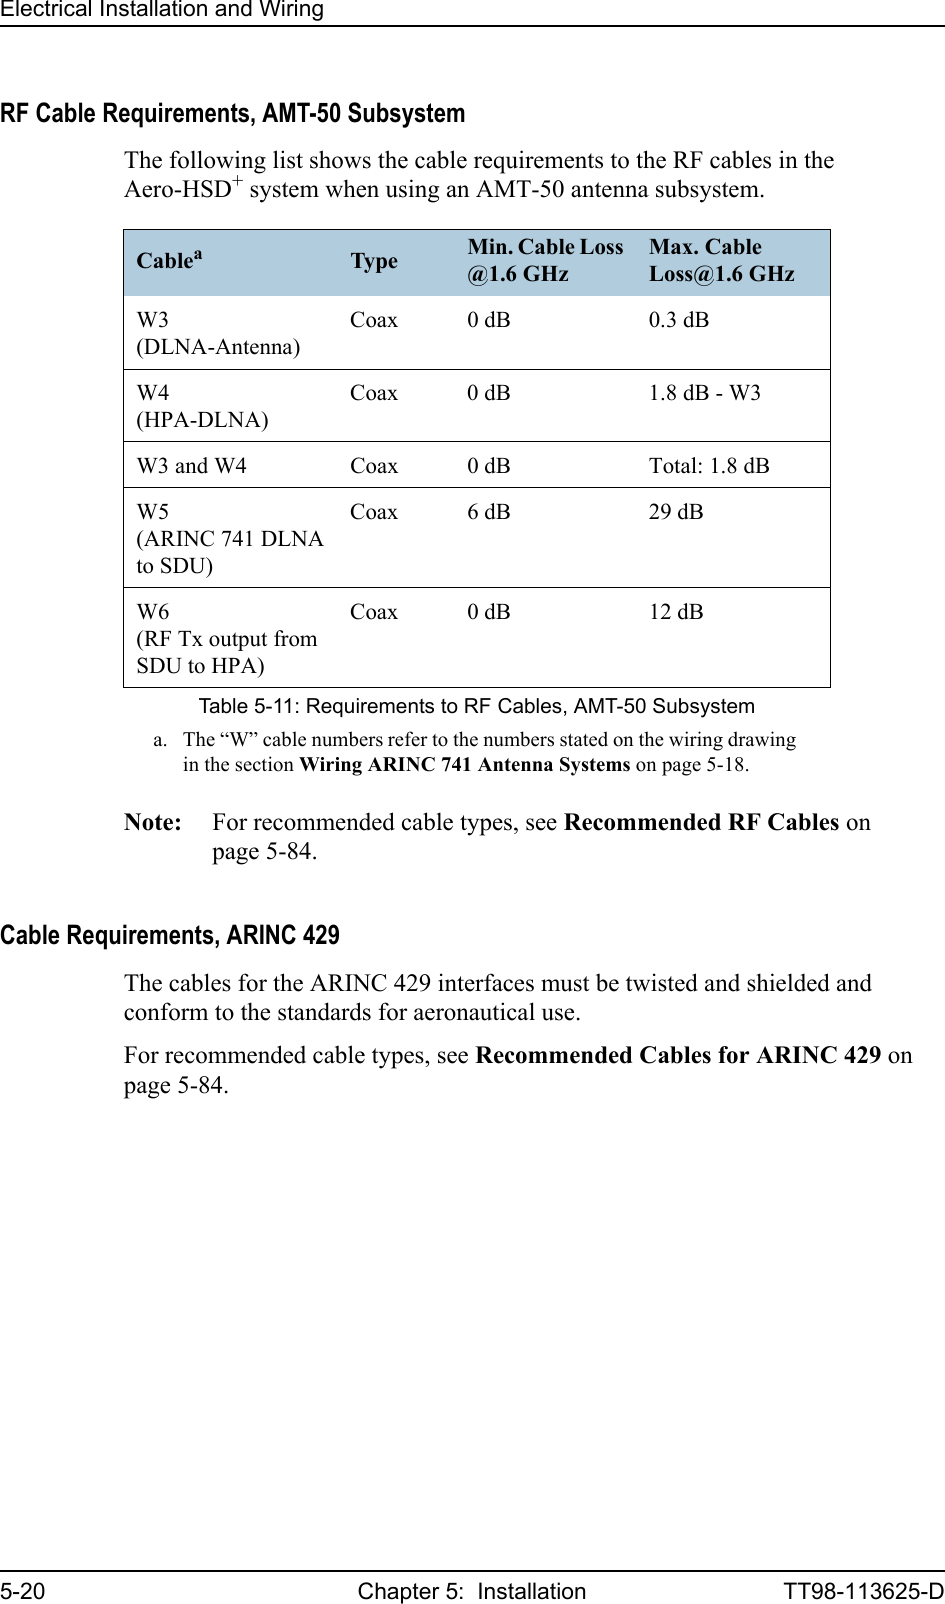 Electrical Installation and Wiring5-20 Chapter 5:  Installation TT98-113625-DRF Cable Requirements, AMT-50 SubsystemThe following list shows the cable requirements to the RF cables in the Aero-HSD+ system when using an AMT-50 antenna subsystem.Note: For recommended cable types, see Recommended RF Cables on page 5-84.Cable Requirements, ARINC 429The cables for the ARINC 429 interfaces must be twisted and shielded and conform to the standards for aeronautical use.For recommended cable types, see Recommended Cables for ARINC 429 on page 5-84.Cableaa. The “W” cable numbers refer to the numbers stated on the wiring drawing in the section Wiring ARINC 741 Antenna Systems on page 5-18.Type Min. Cable Loss @1.6 GHzMax. Cable Loss@1.6 GHzW3(DLNA-Antenna)Coax 0 dB 0.3 dBW4(HPA-DLNA)Coax 0 dB 1.8 dB - W3W3 and W4 Coax 0 dB Total: 1.8 dBW5(ARINC 741 DLNAto SDU)Coax 6 dB 29 dBW6(RF Tx output from SDU to HPA)Coax 0 dB 12 dBTable 5-11: Requirements to RF Cables, AMT-50 Subsystem